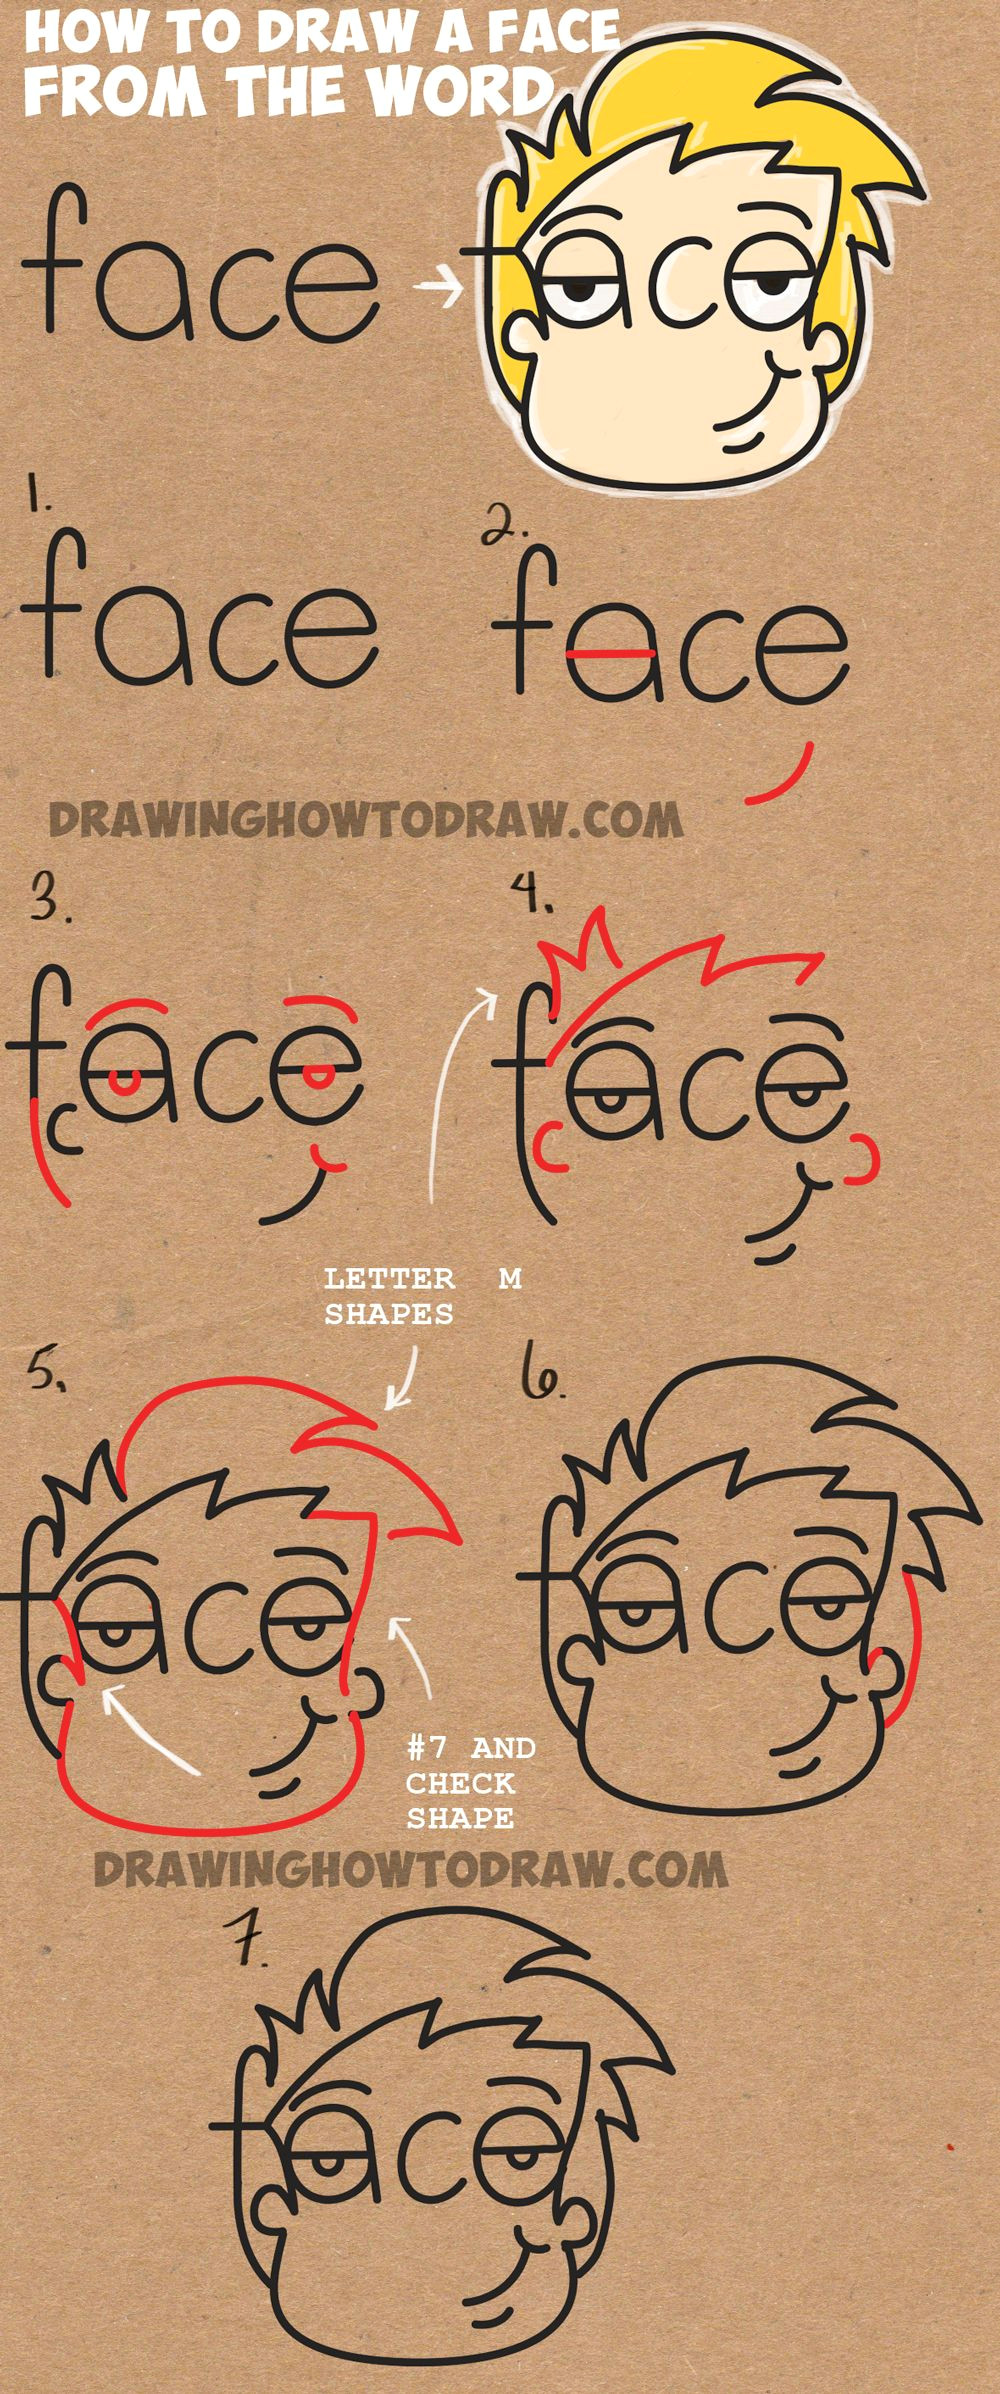 Drawing Cartoons From Numbers How to Draw Cartoon Faces From the Word Face Easy Step by Step